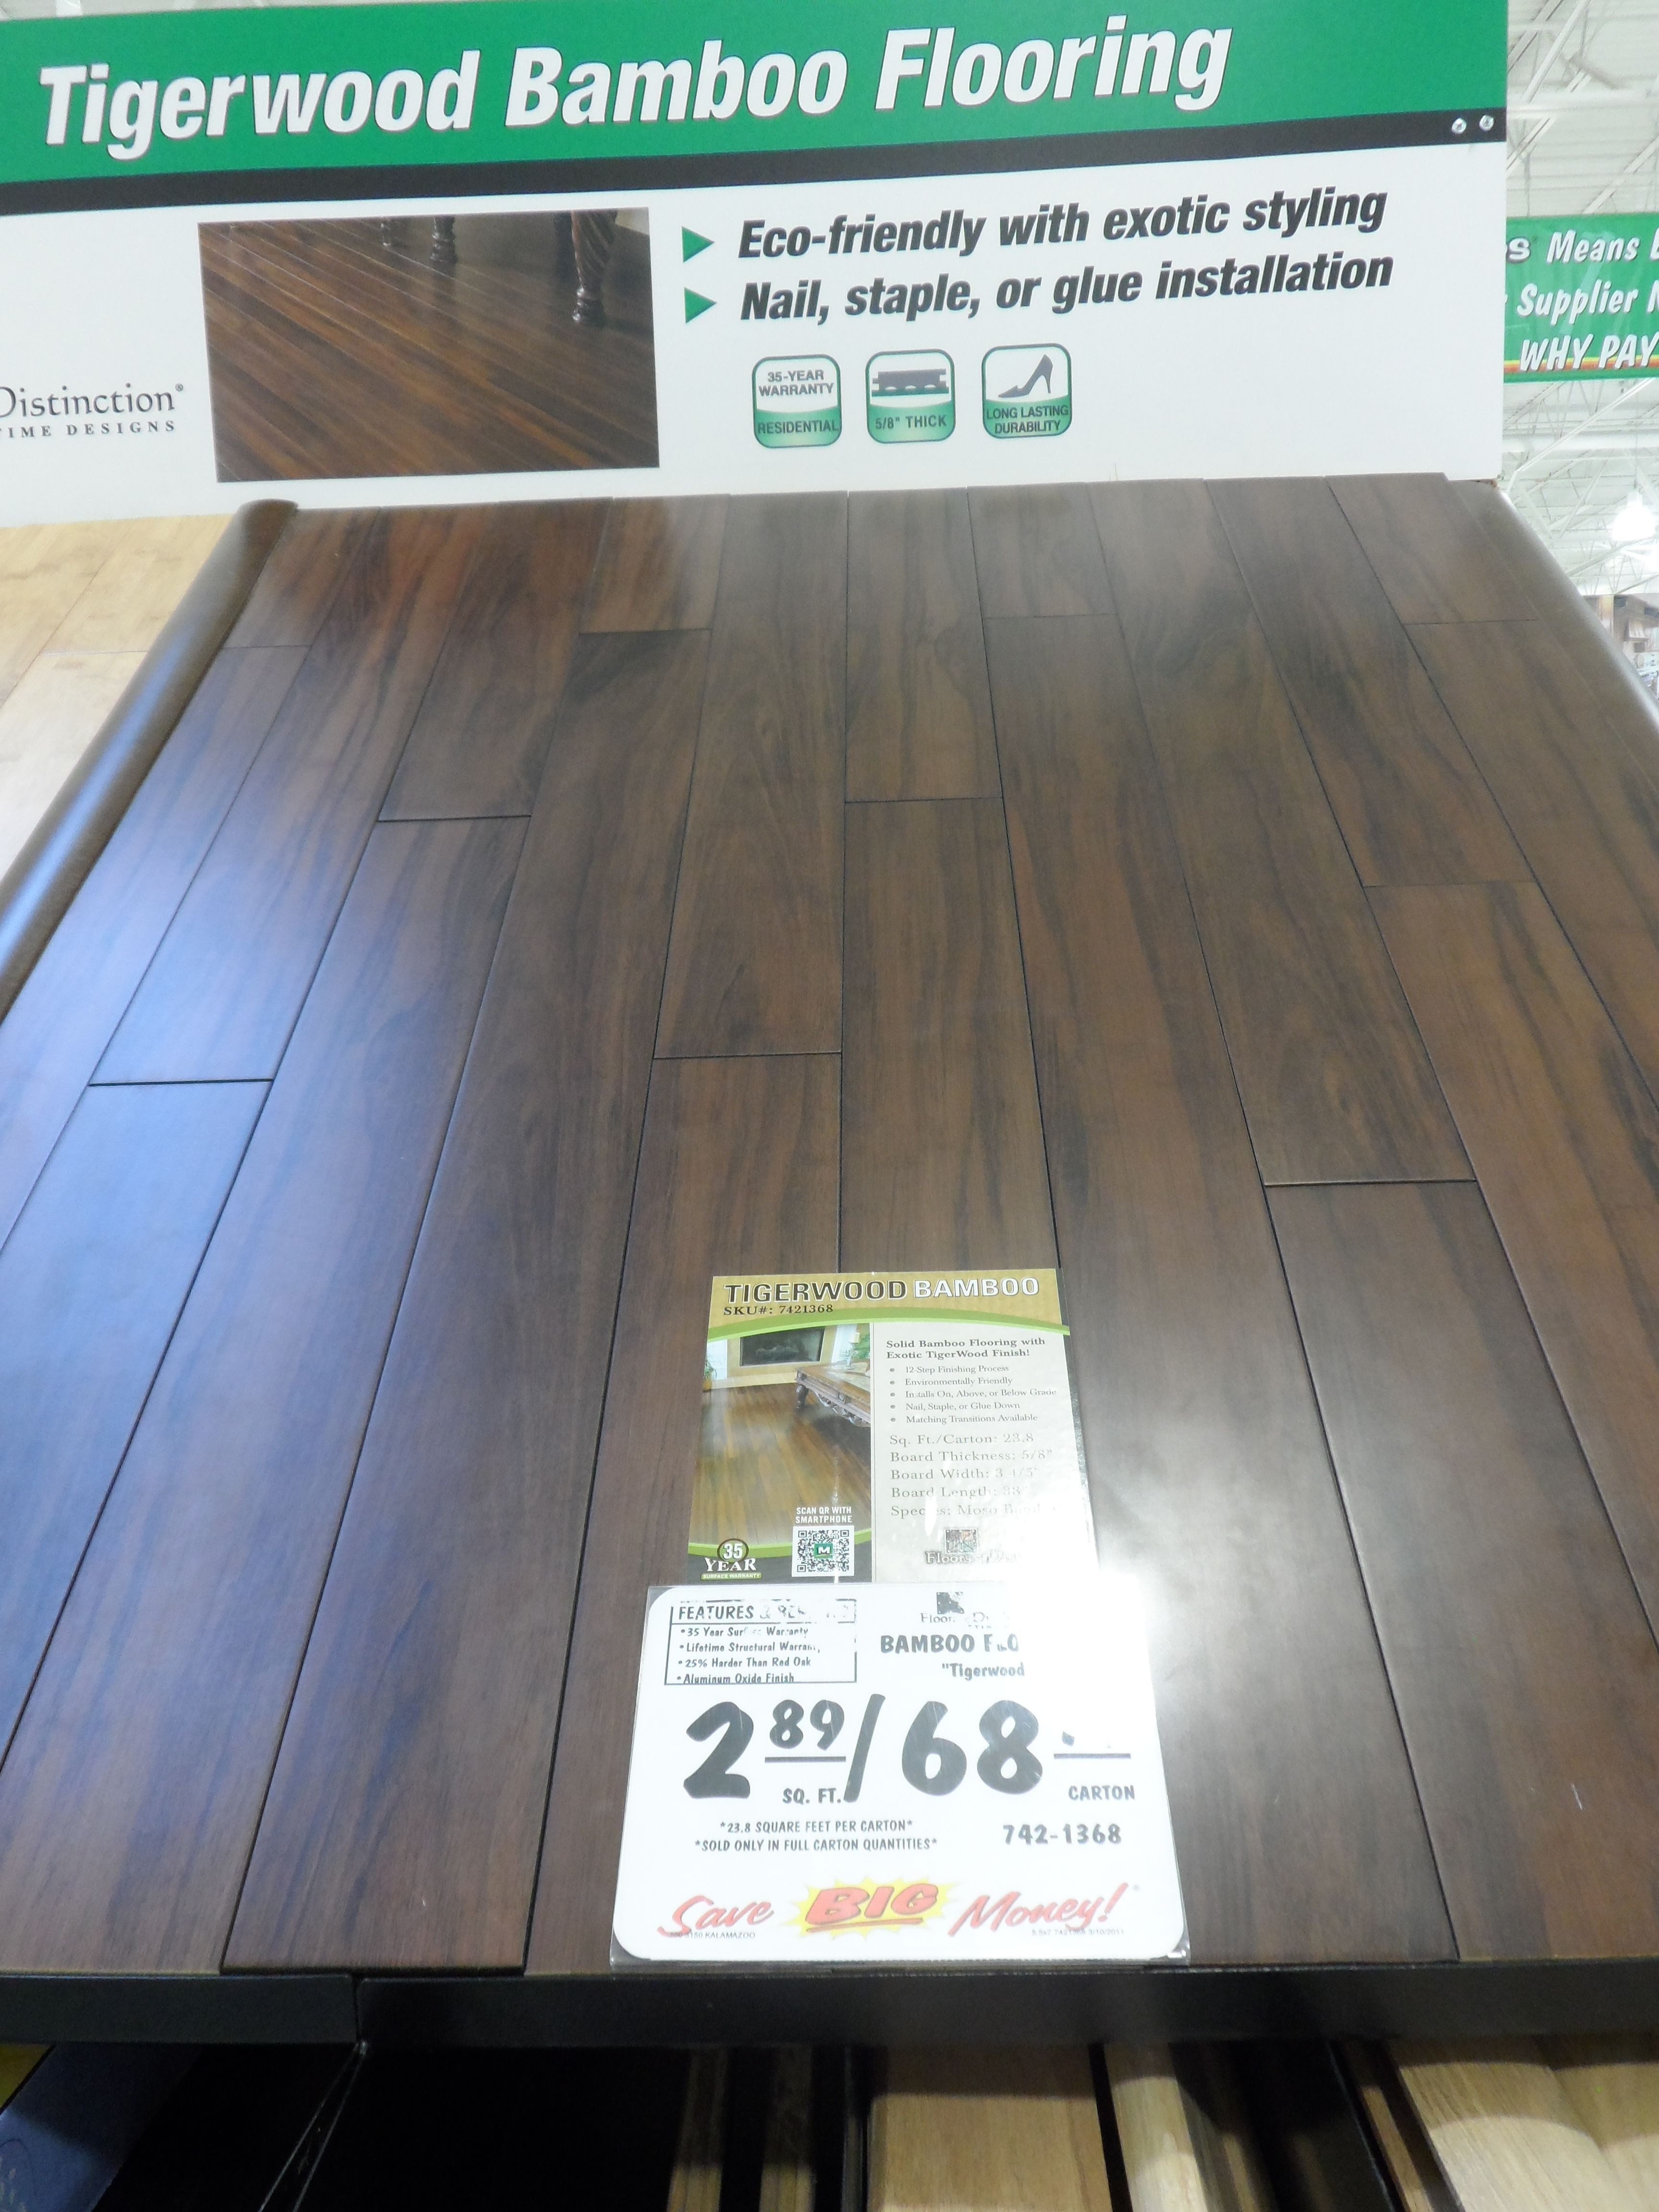 pictures of cupping hardwood floors of 18 fresh how much is bamboo flooring pictures dizpos com inside how much is bamboo flooring unique tigerwood bamboo flooring menards flooring pinterest stock of 18 fresh